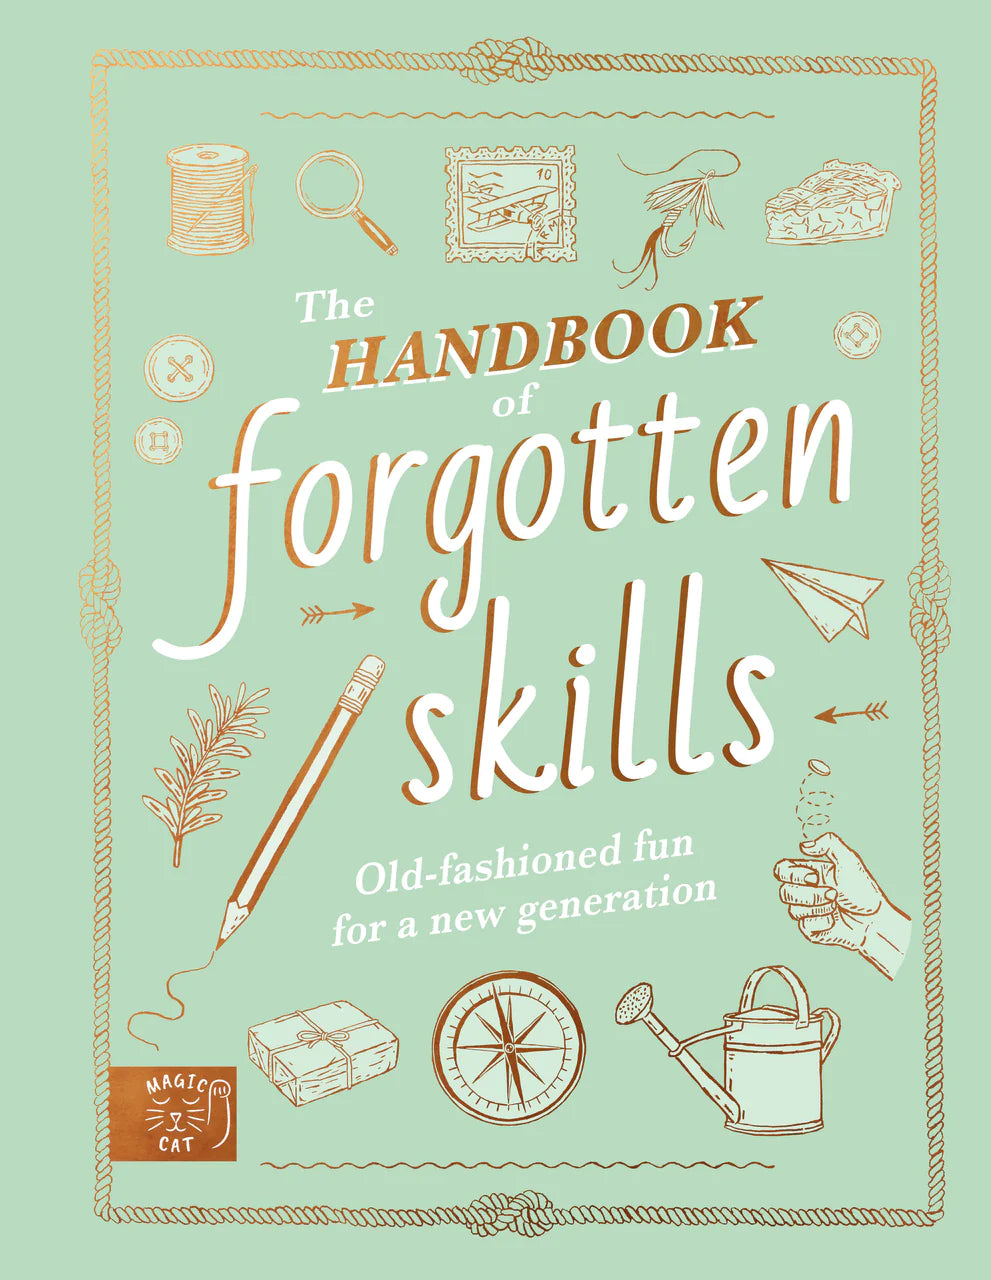 The Handbook of Forgotten Skills by Abrams & Chronicle